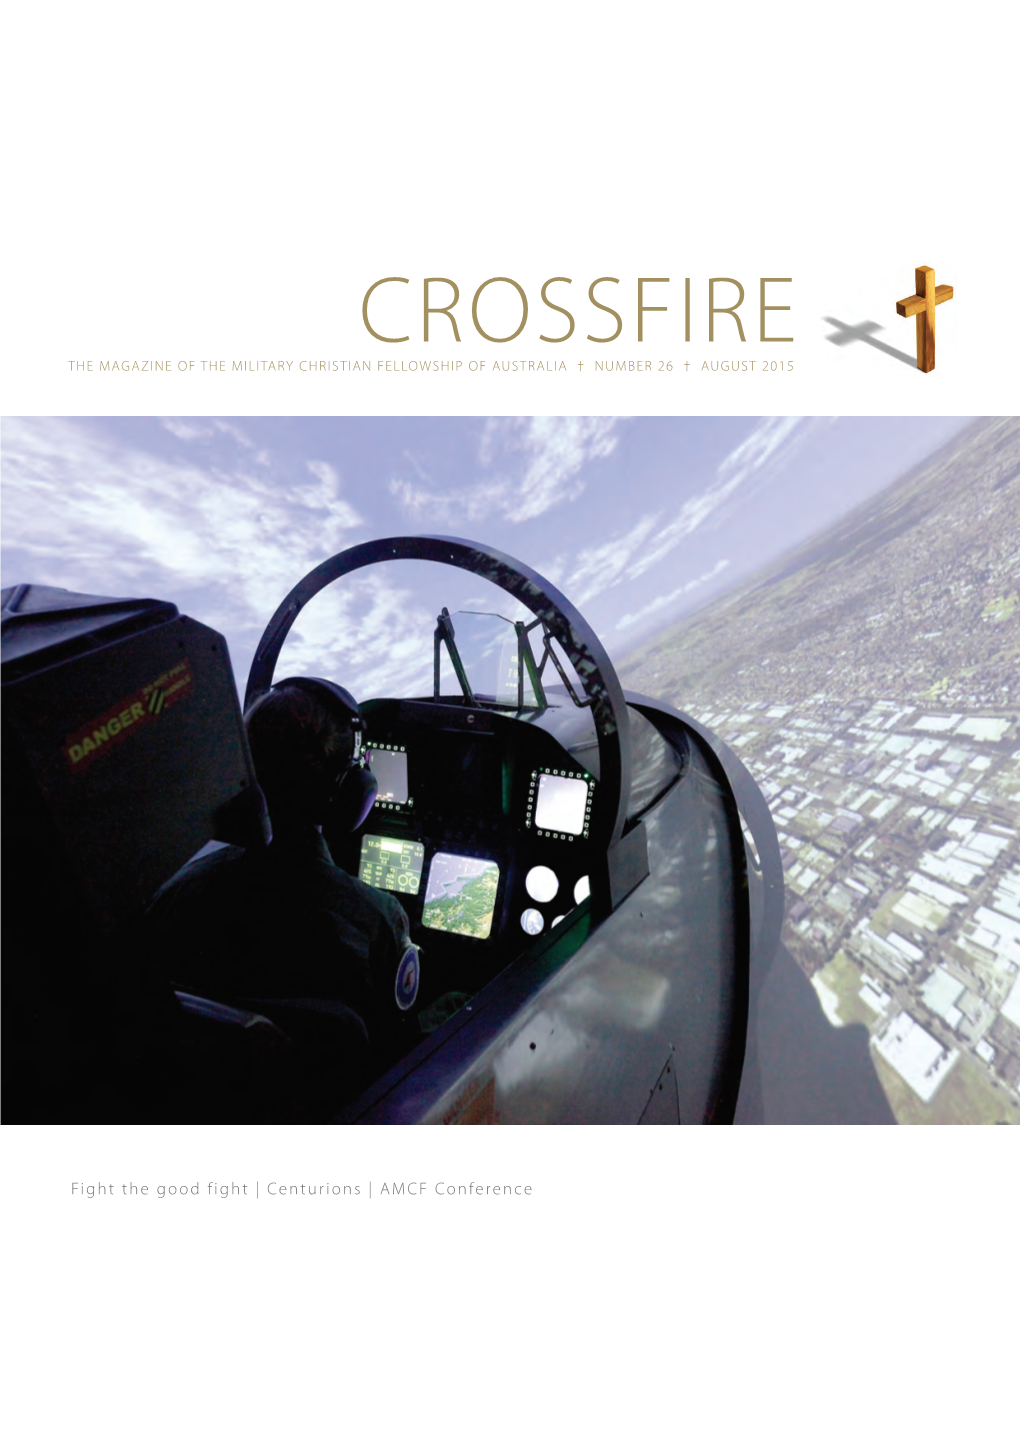 Crossfire the Magazine of the Military Christian Fellowship of Australia † Number 26 † August 2015